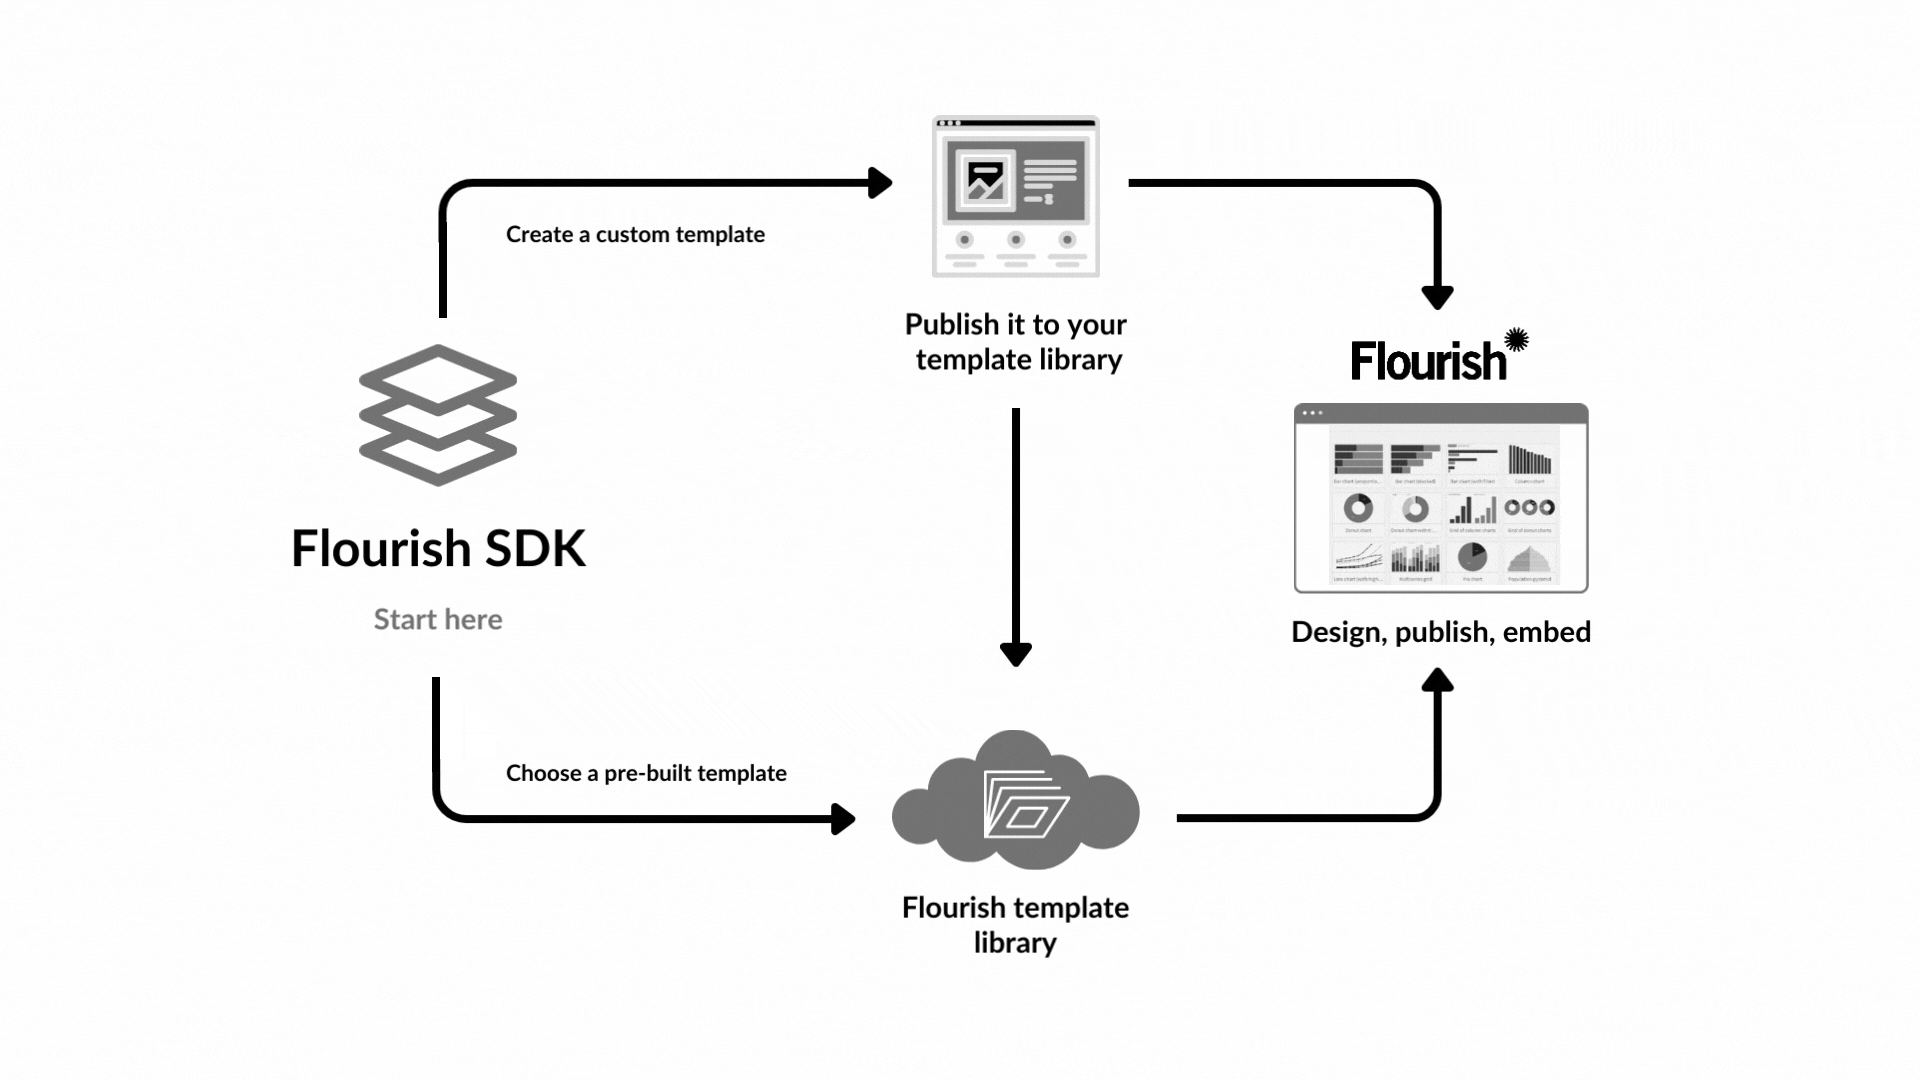 Graphic showing the Flourish architecture, and how you can use the SDK to publish your own custom template that can then be accessed through the Flourish template library.